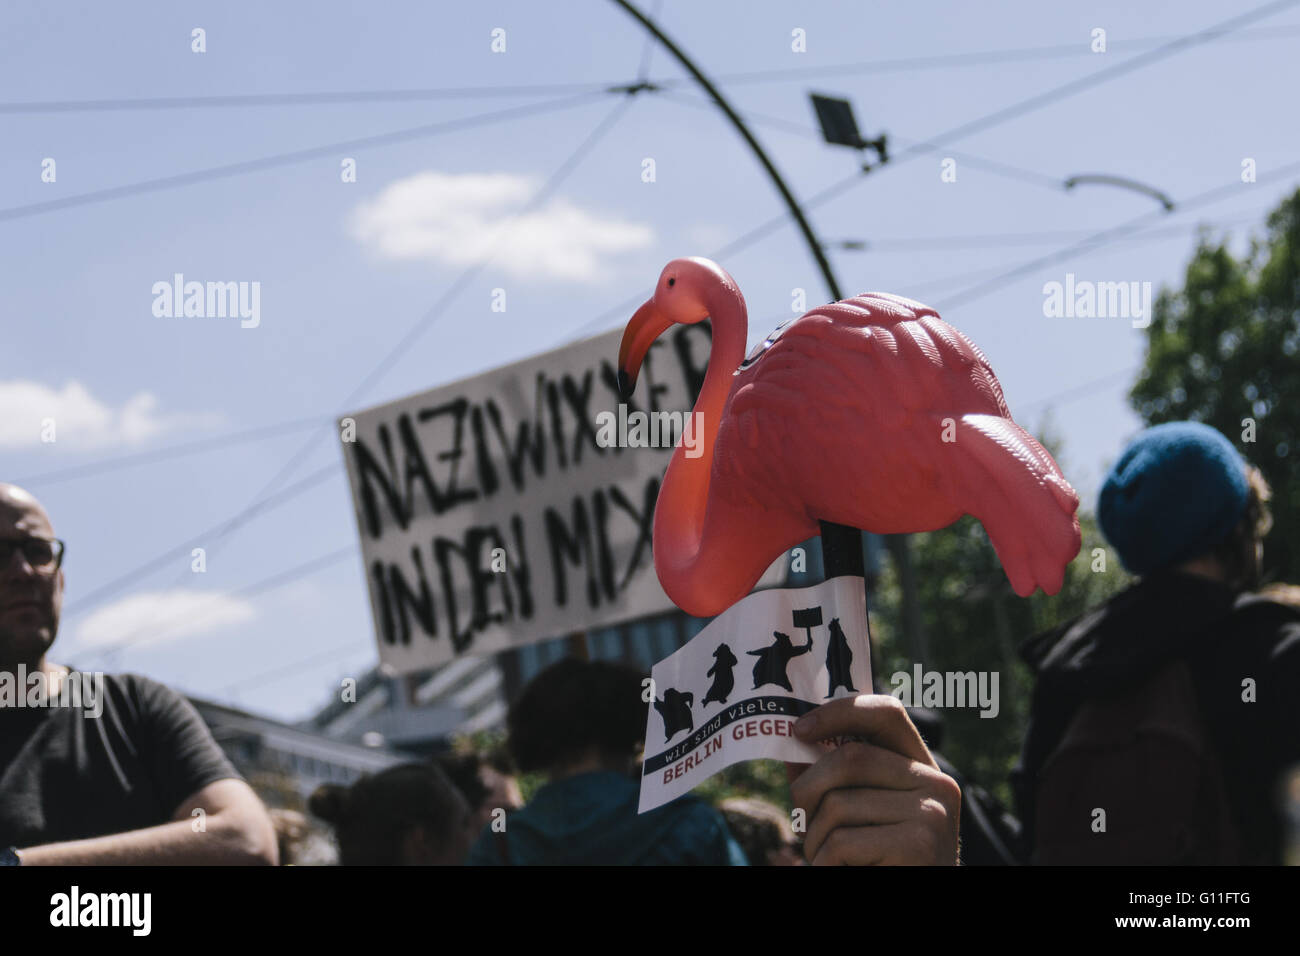 Berlin, Berlin, Germany. 7th May, 2016. A protester holhing a pink flamingo during the counter protests against the rally held under the motto 'Merkel muss weg![Merkel must go]' organised by far-right group 'We for Berlin & We for Germany' Credit:  Jan Scheunert/ZUMA Wire/Alamy Live News Stock Photo